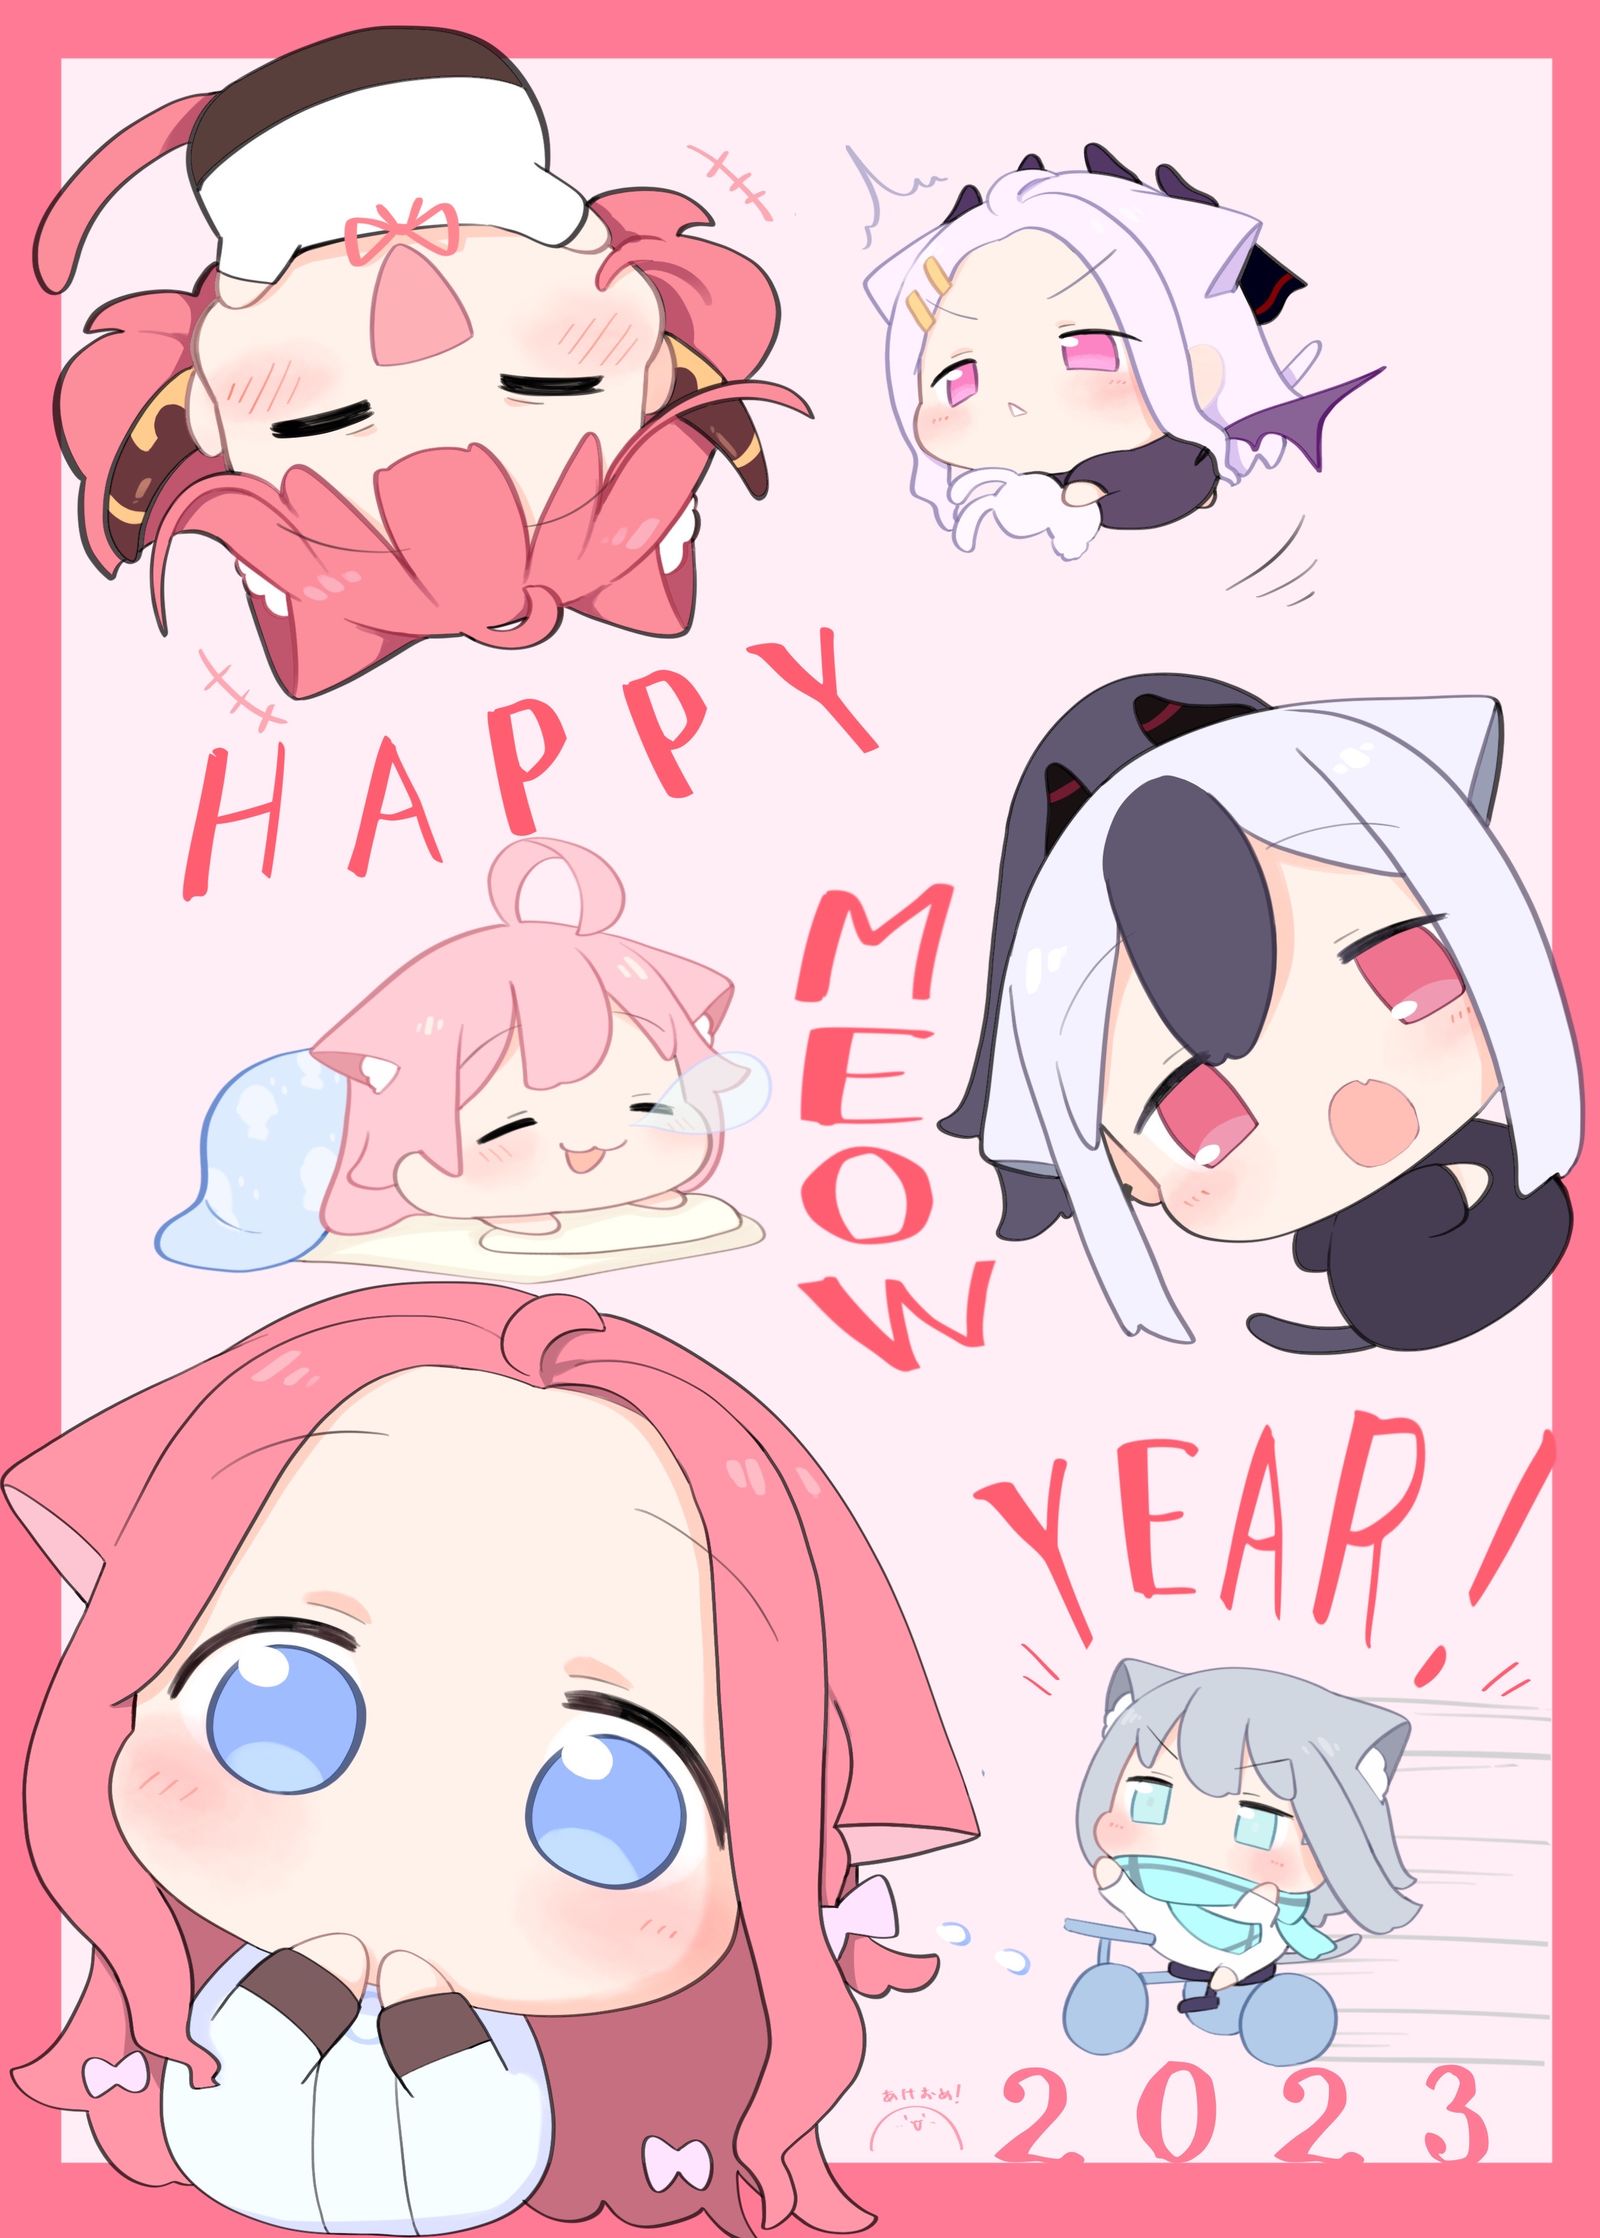 Happy Meow Year!